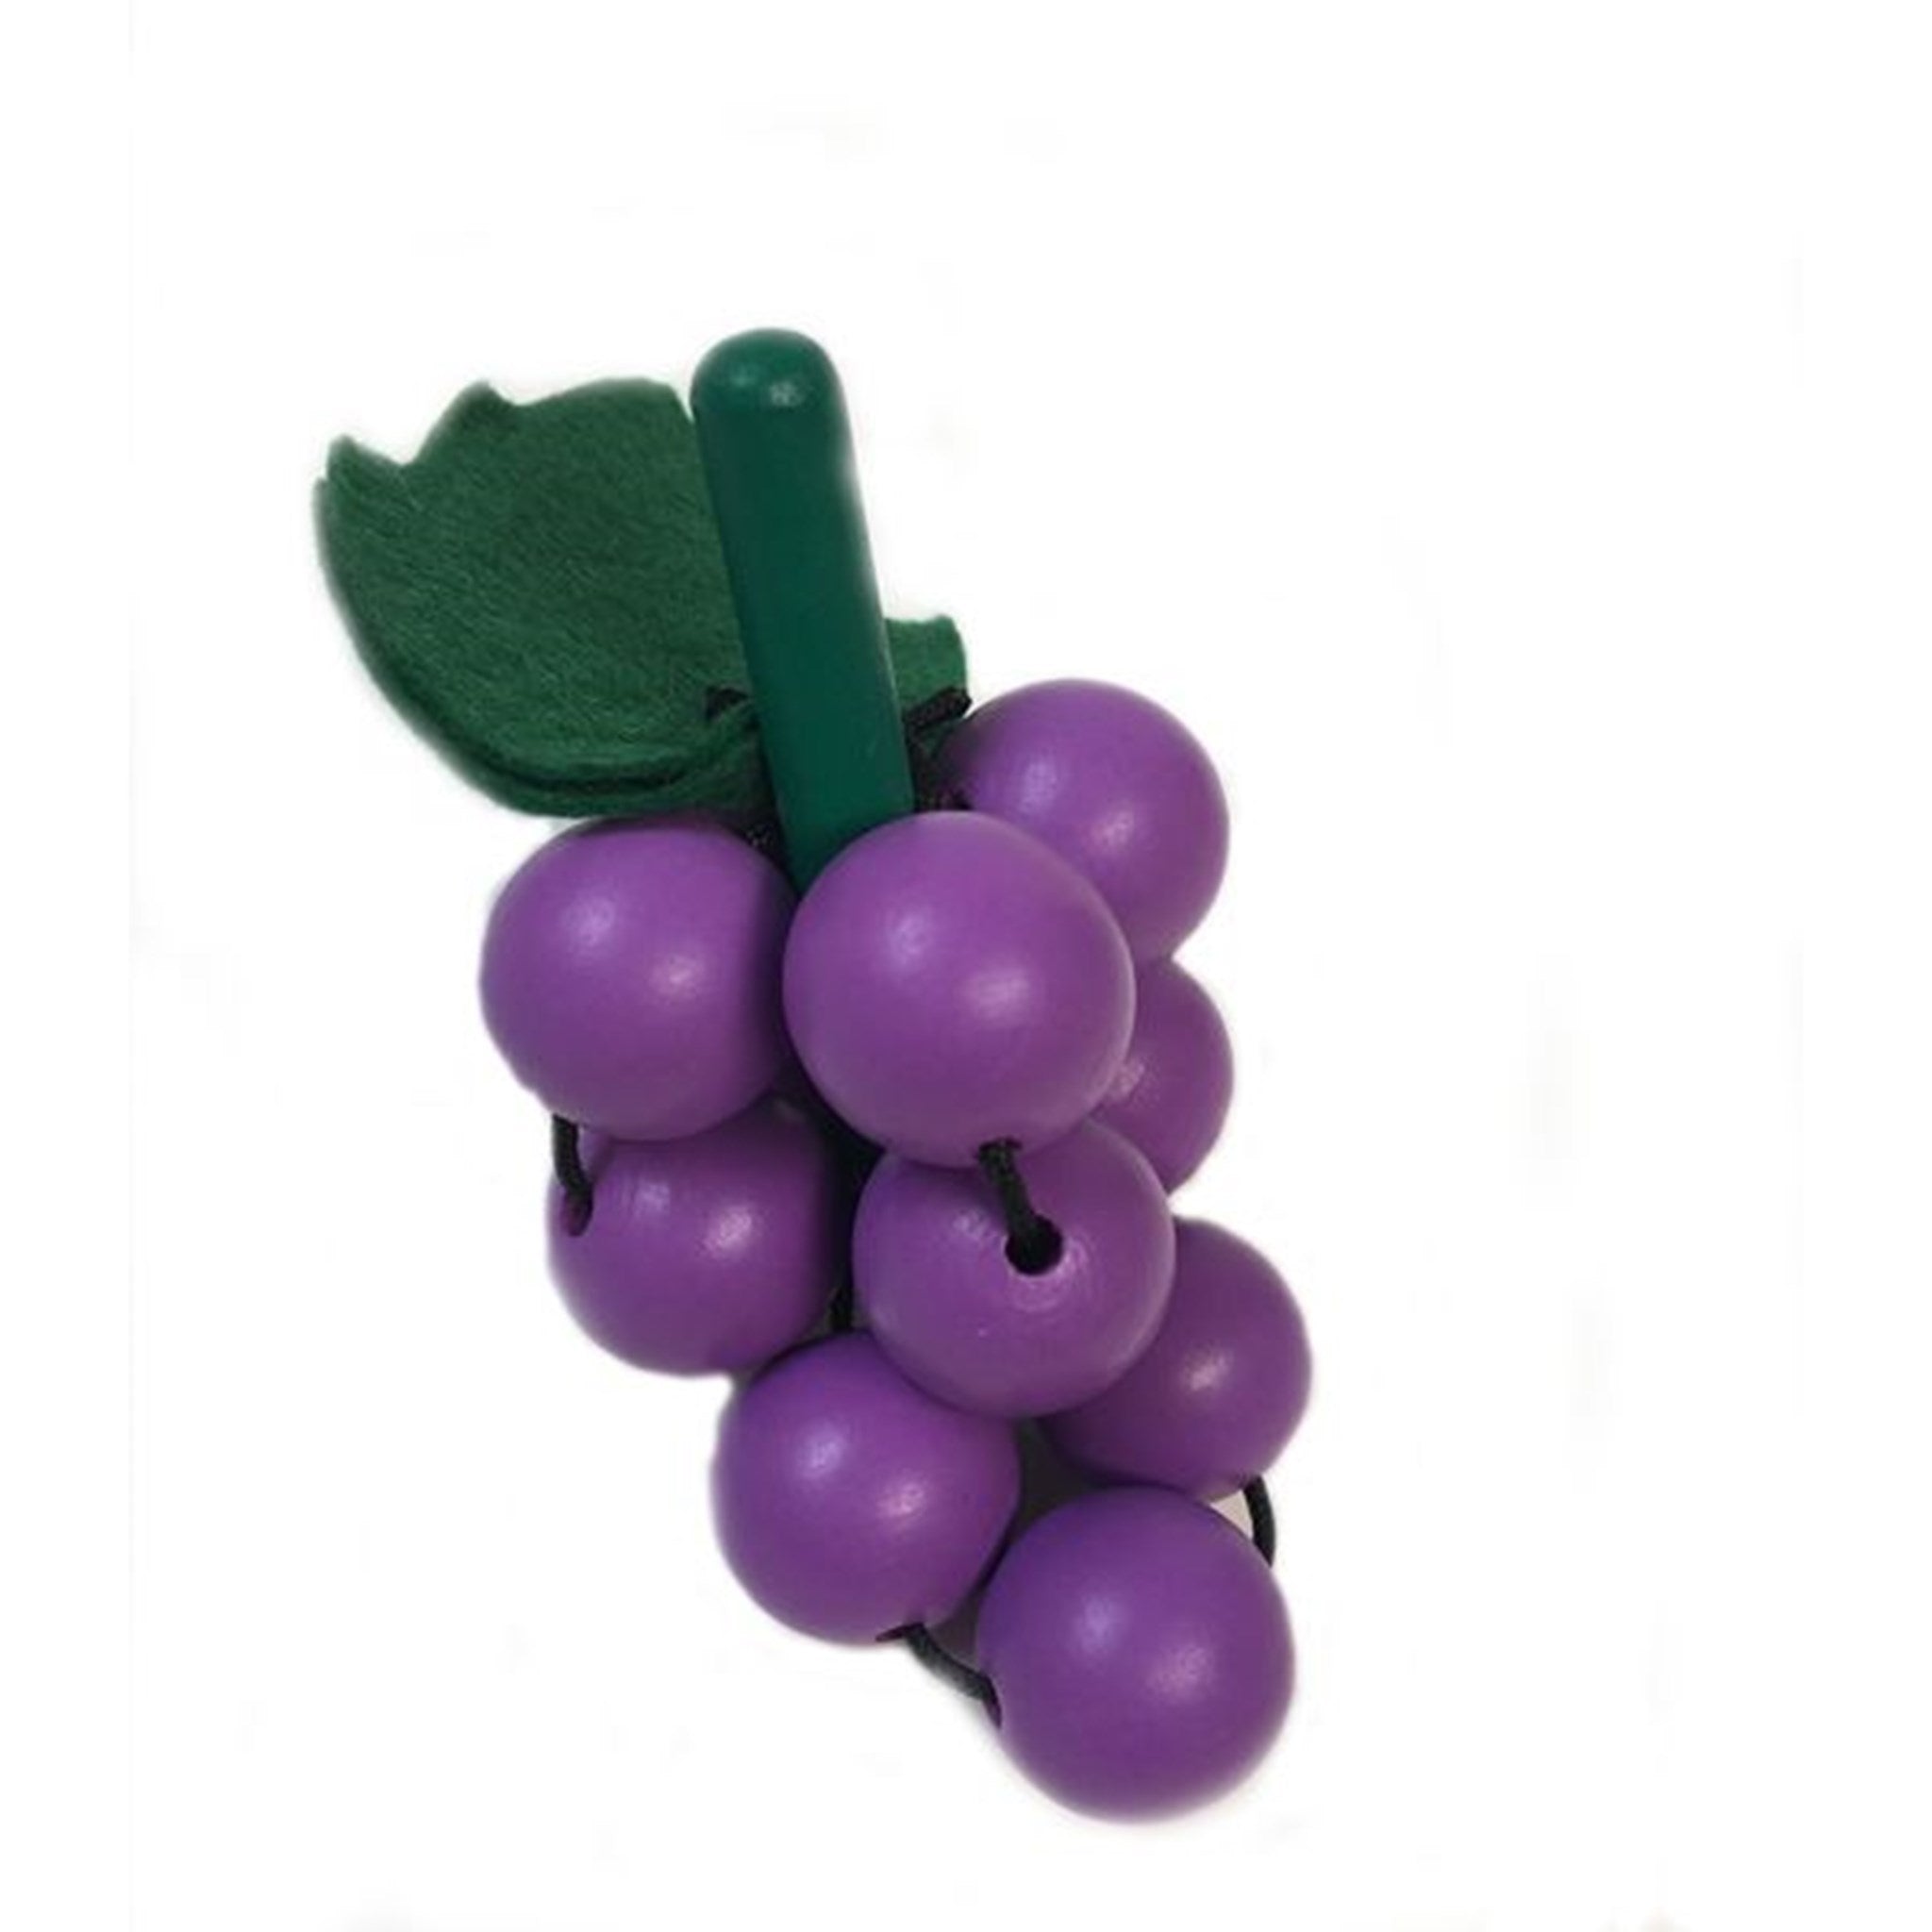 MaMaMemo Bunch of Grapes